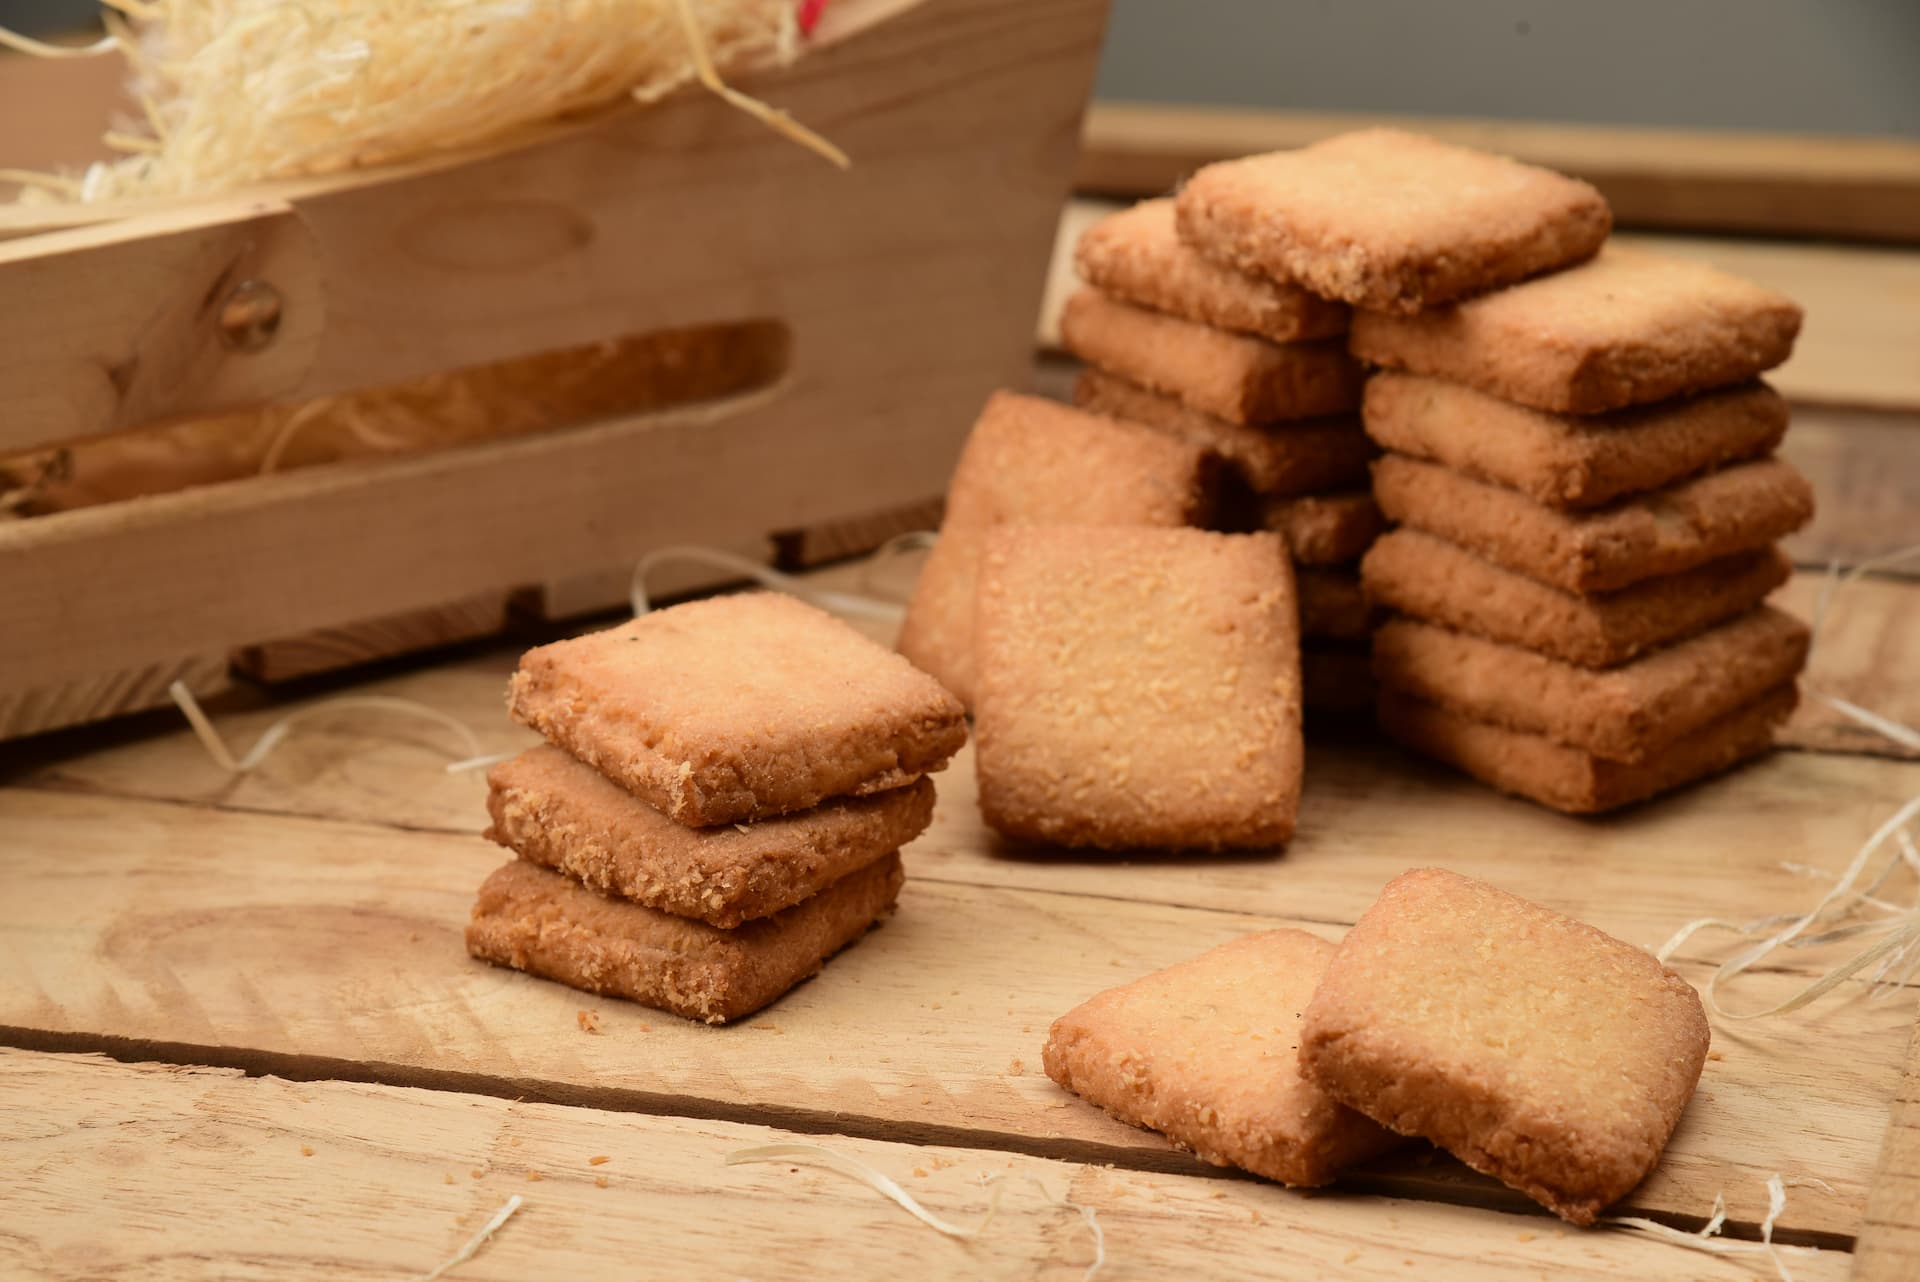 Single Malt Shortbread Biscuit Recipes That You Won’t Be Able to Get Enough Of